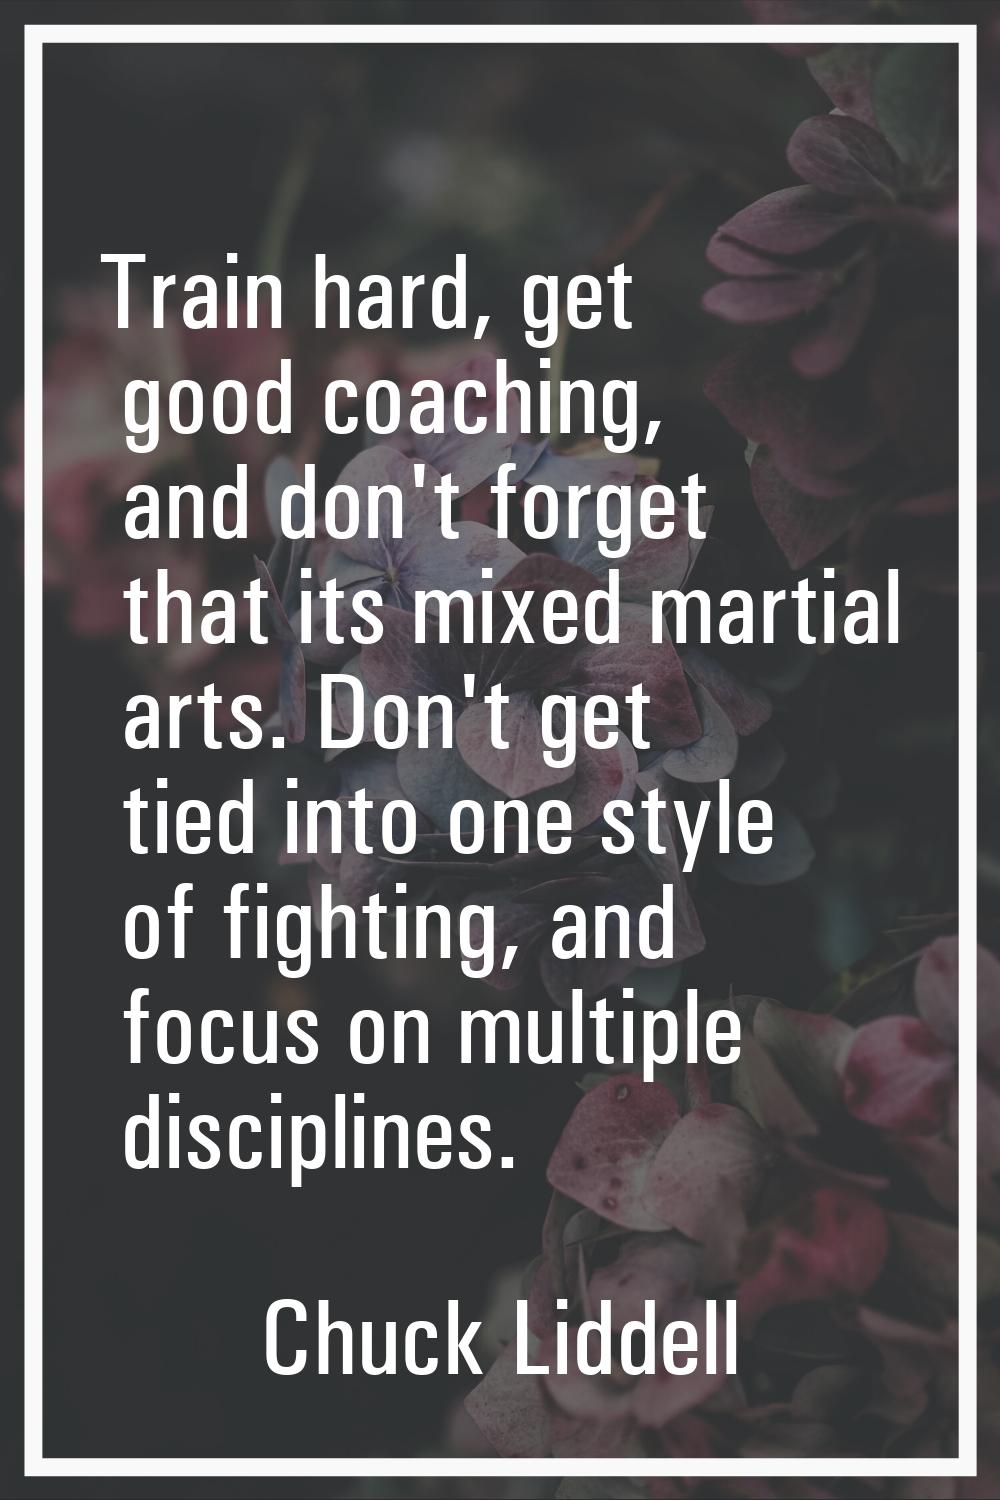 Train hard, get good coaching, and don't forget that its mixed martial arts. Don't get tied into on